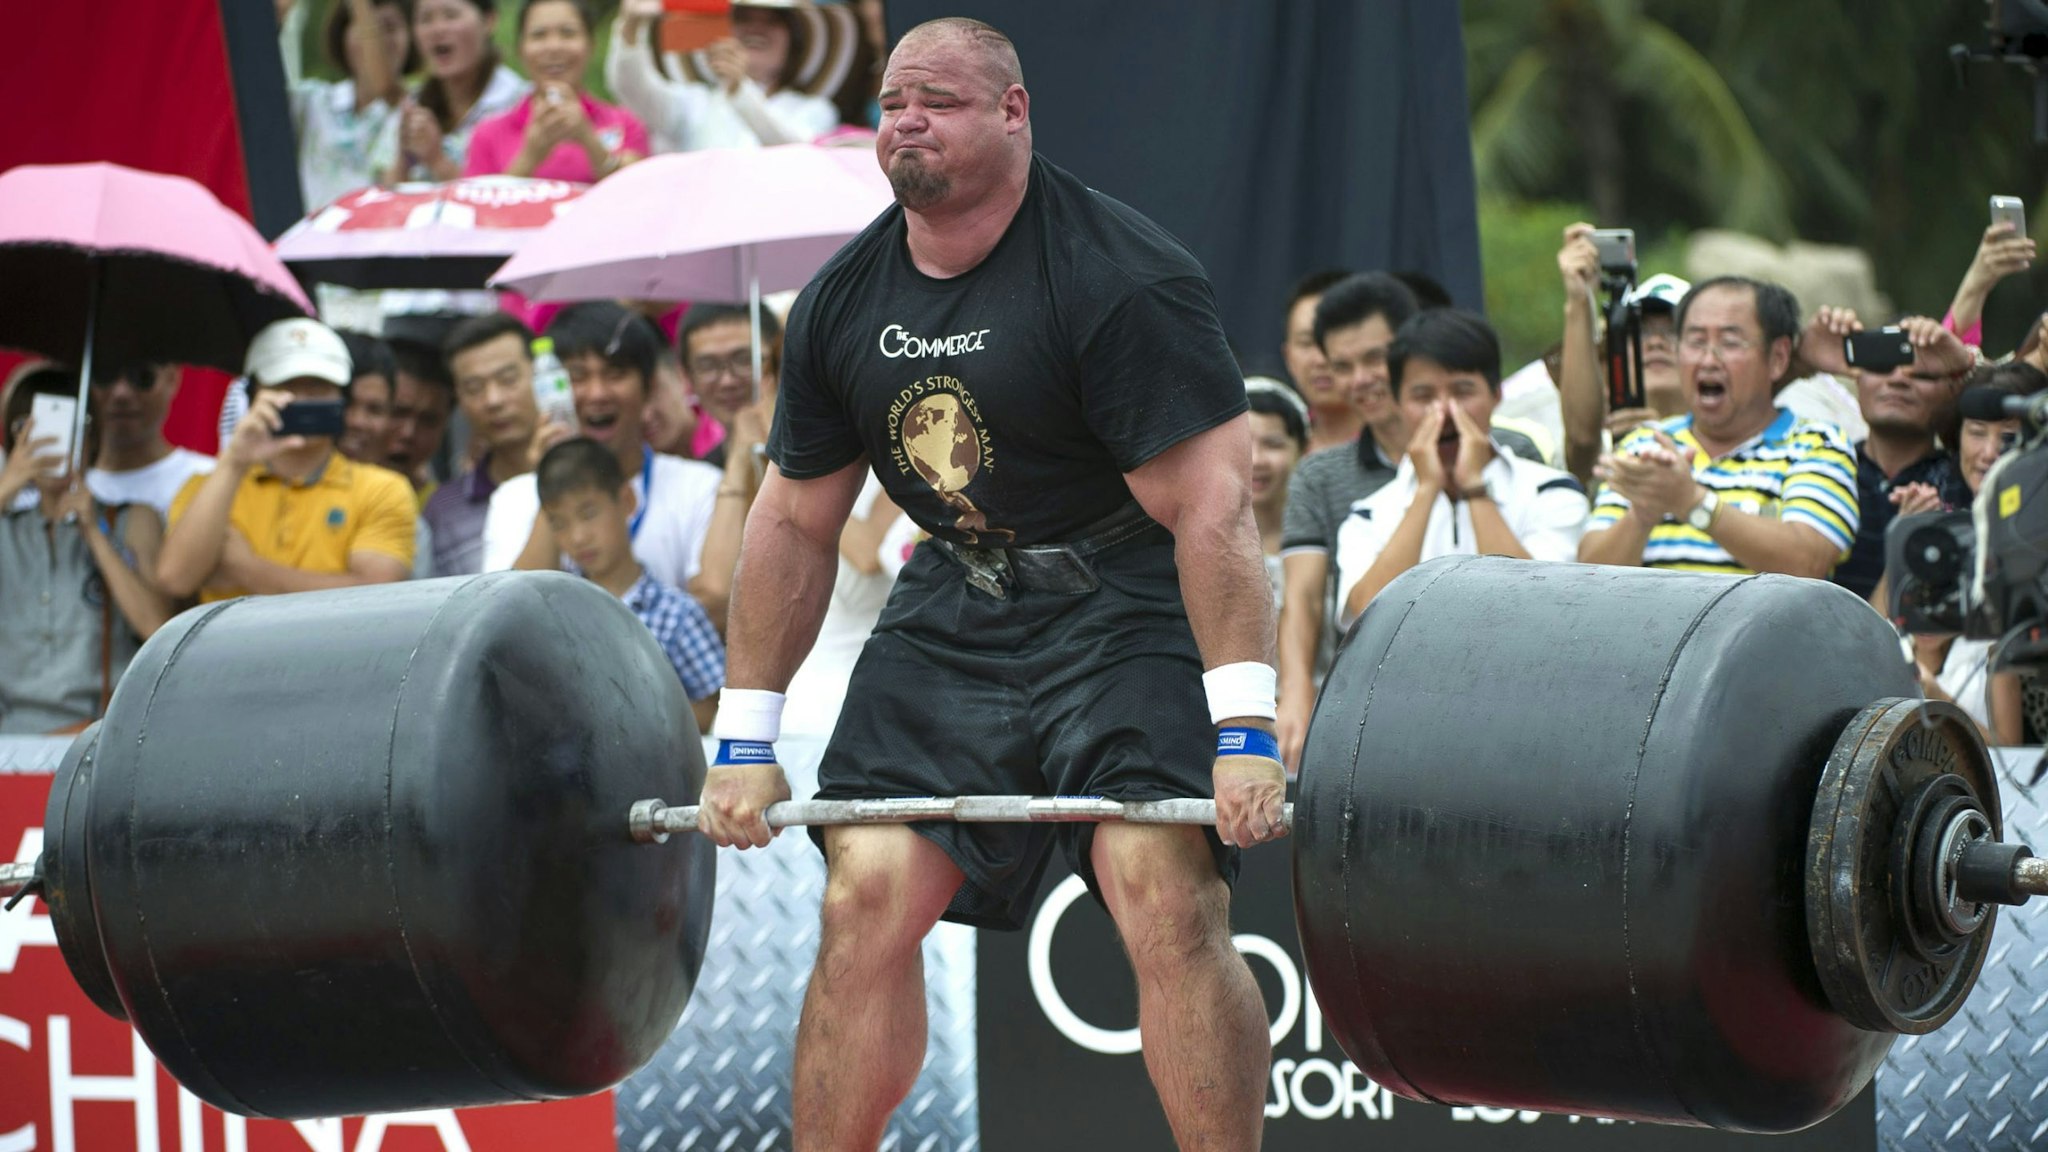 HAINAN ISLAND, CHINA - AUGUST 24: Brian Shaw of USA competes at the Deadlift for Max event during the World's Strongest Man competition at Yalong Bay Cultural Square on August 24, 2013 in Hainan Island, China.